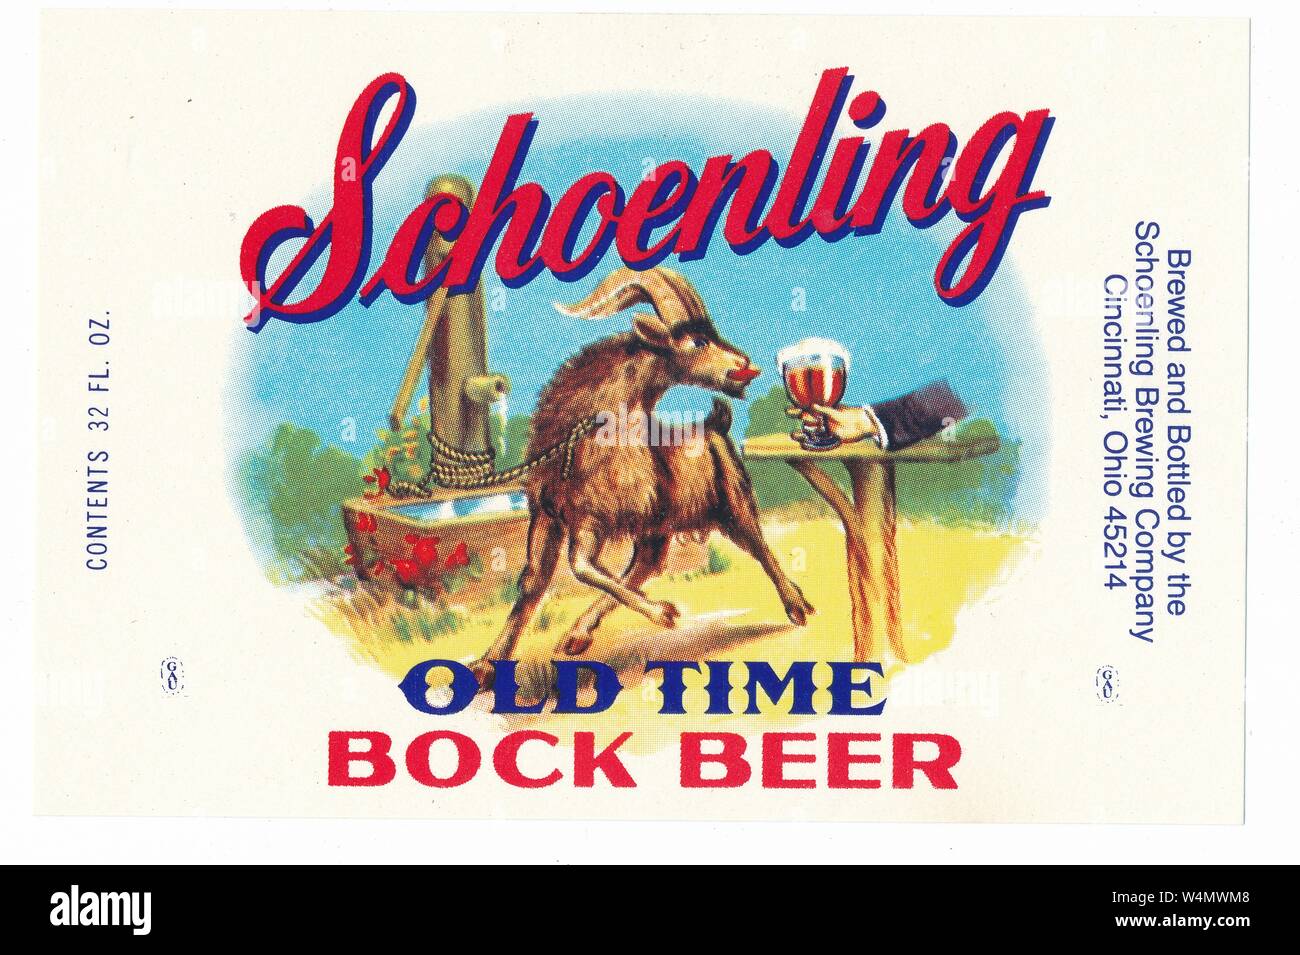 Vintage beer bottle label, with an image of a male goat reaching for a glass of beer, labeled 'Schoenling Old Time Bock Beer, ' manufactured by the Schoenling Brewing Company, Cincinnati, Ohio, 1955. () Stock Photo